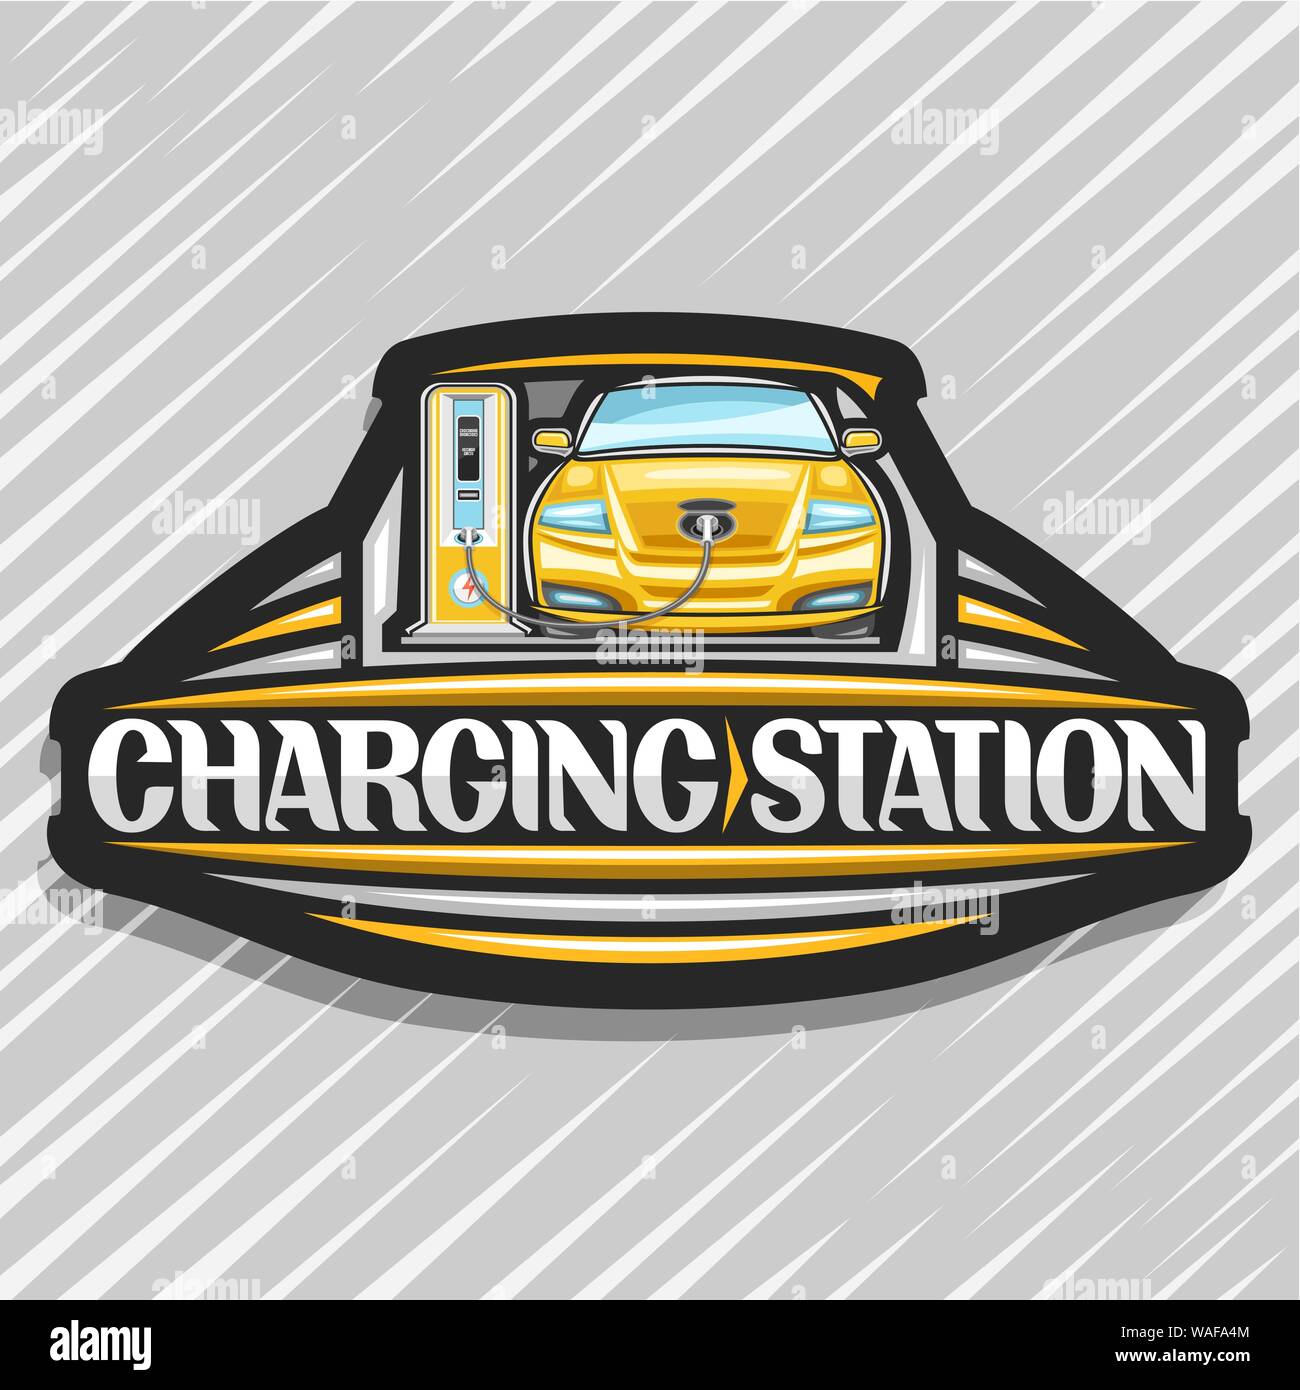 Vector logo for Electric Car Charging Station, black design signboard with cartoon electric vehicle loading in high power charger, original lettering Stock Vector